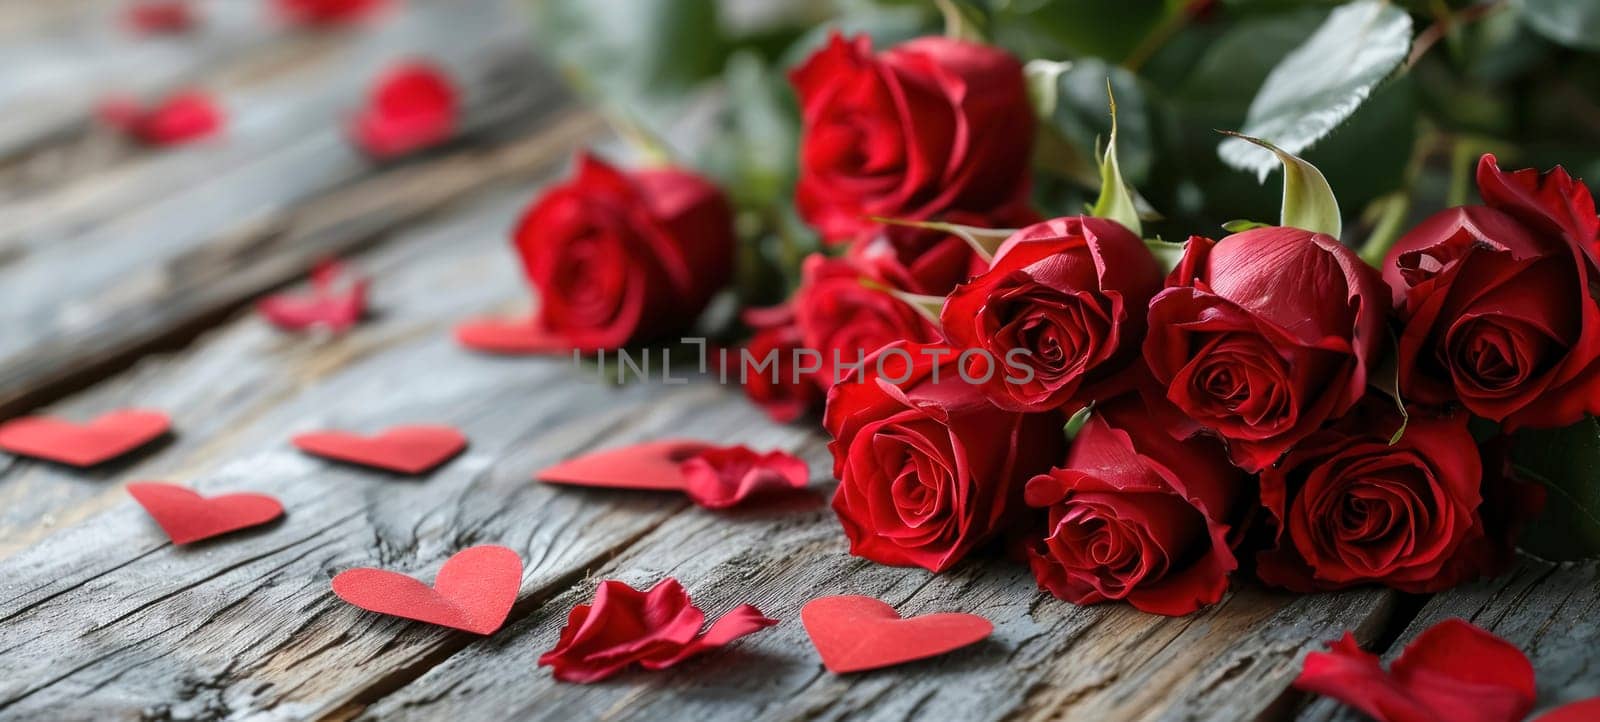 Roses and hearts on wooden board, Valentine's Day background, wedding day.